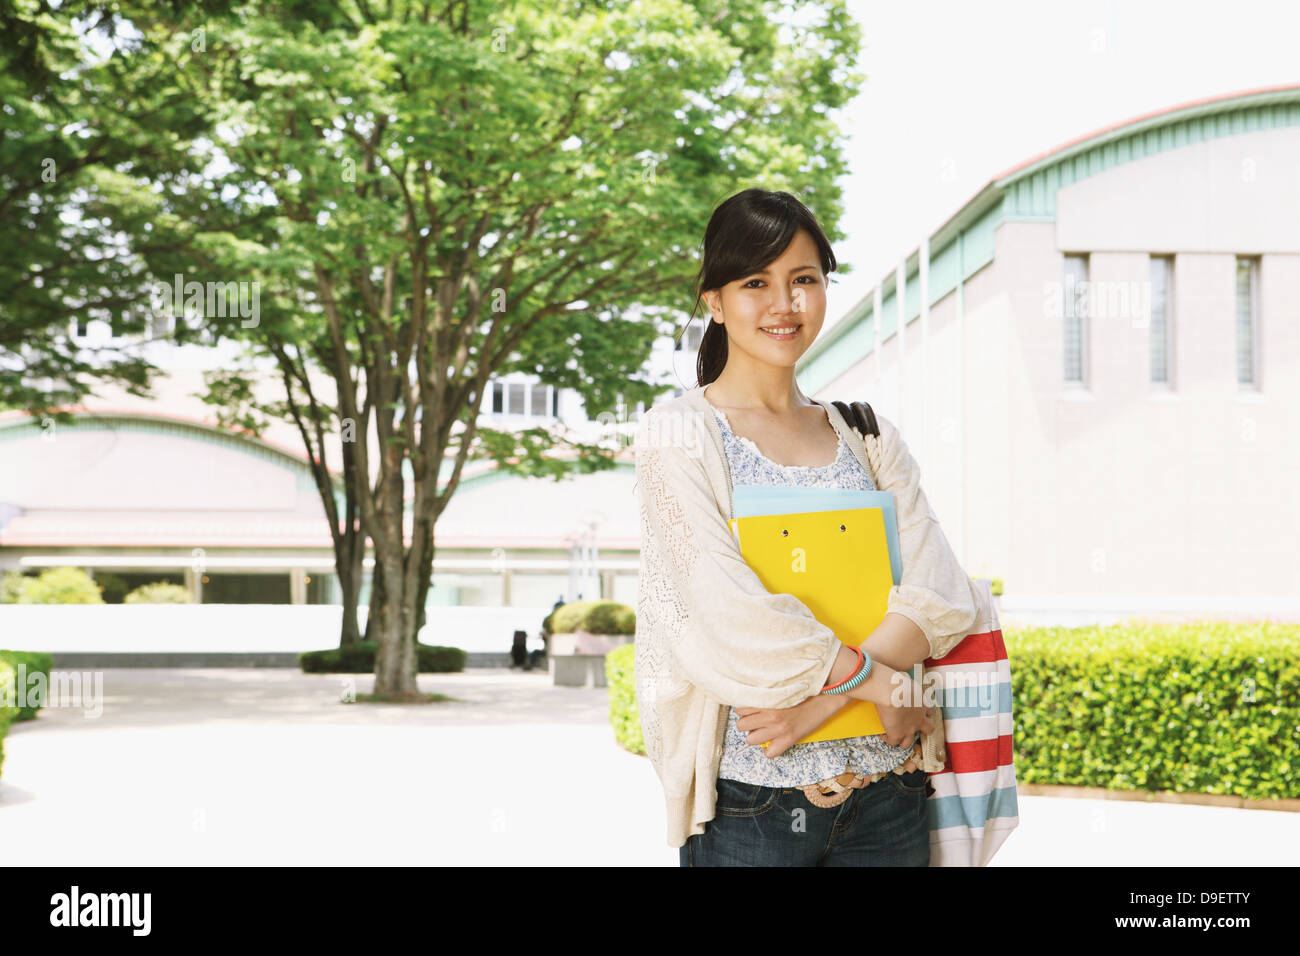 Female college student in a campus smiling at camera Stock Photo